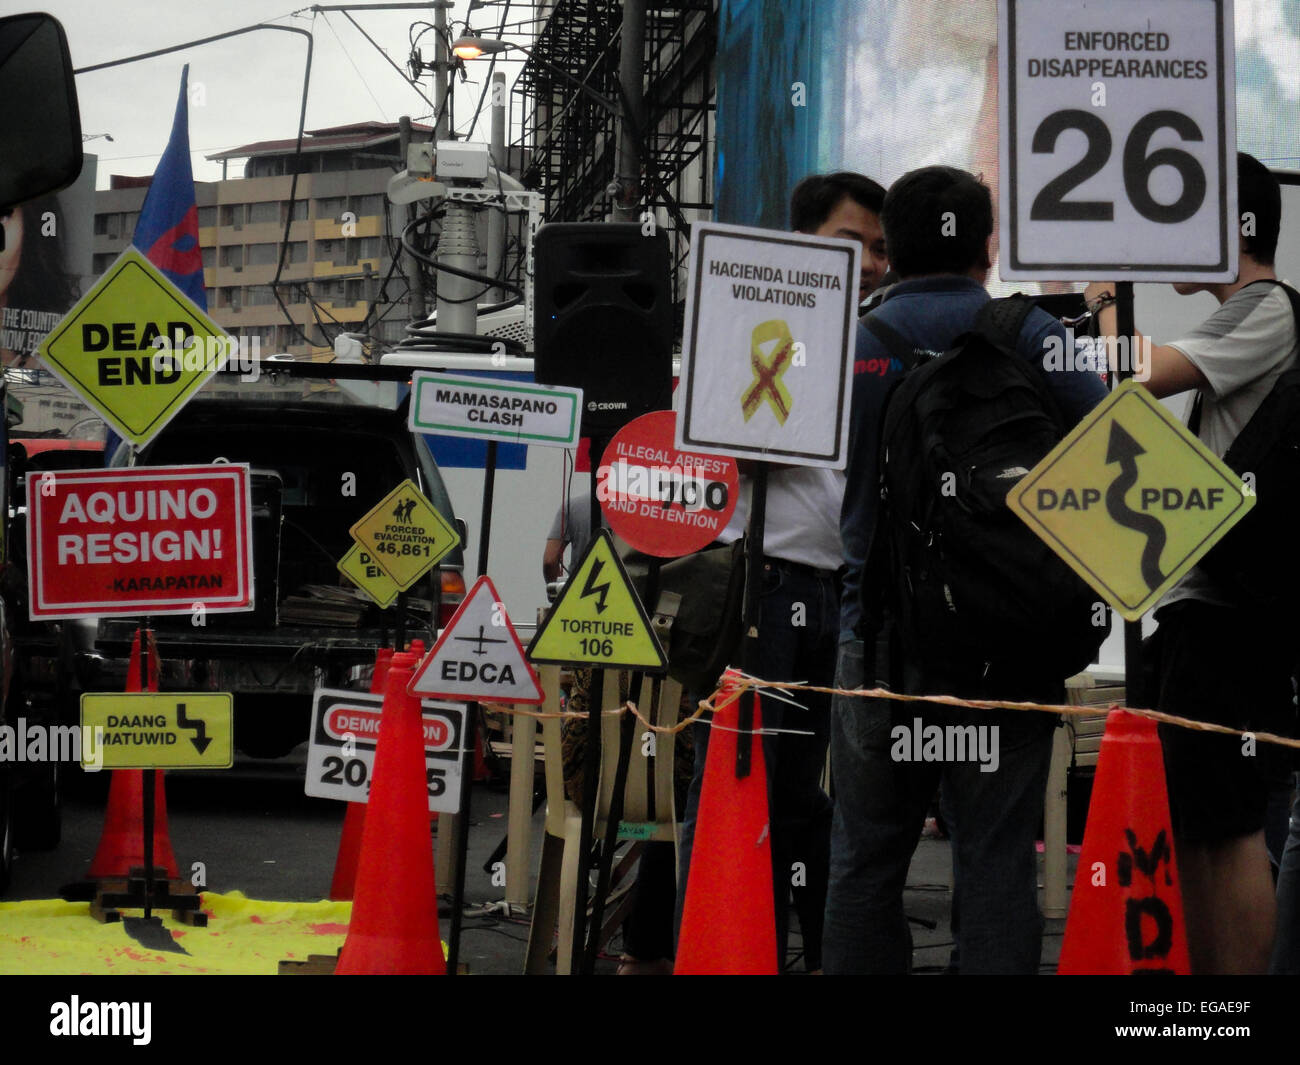 Road signs that mention issues hounding the nation lead to a 'dead end' sign along a yellow mock road, symbolizing President Benigno Aquino III's 'Tuwid na Daan' (Straight Path) platform, during a rally at the Plaza Miranda in Quiapo. Activists held a 'People's Hearing' on the Mamasapano incident, where they reported on the findings of a fact-finding mission about the incident, where 44 policemen, 18 Muslim rebels, and 7 civilians were killed in a botched anti-terror operation that reportedly killed Malaysian bombmaker Zulkifli 'Marwan' Abdhir. (Photo by Richard James Mendoza/Pacific Press) Stock Photo